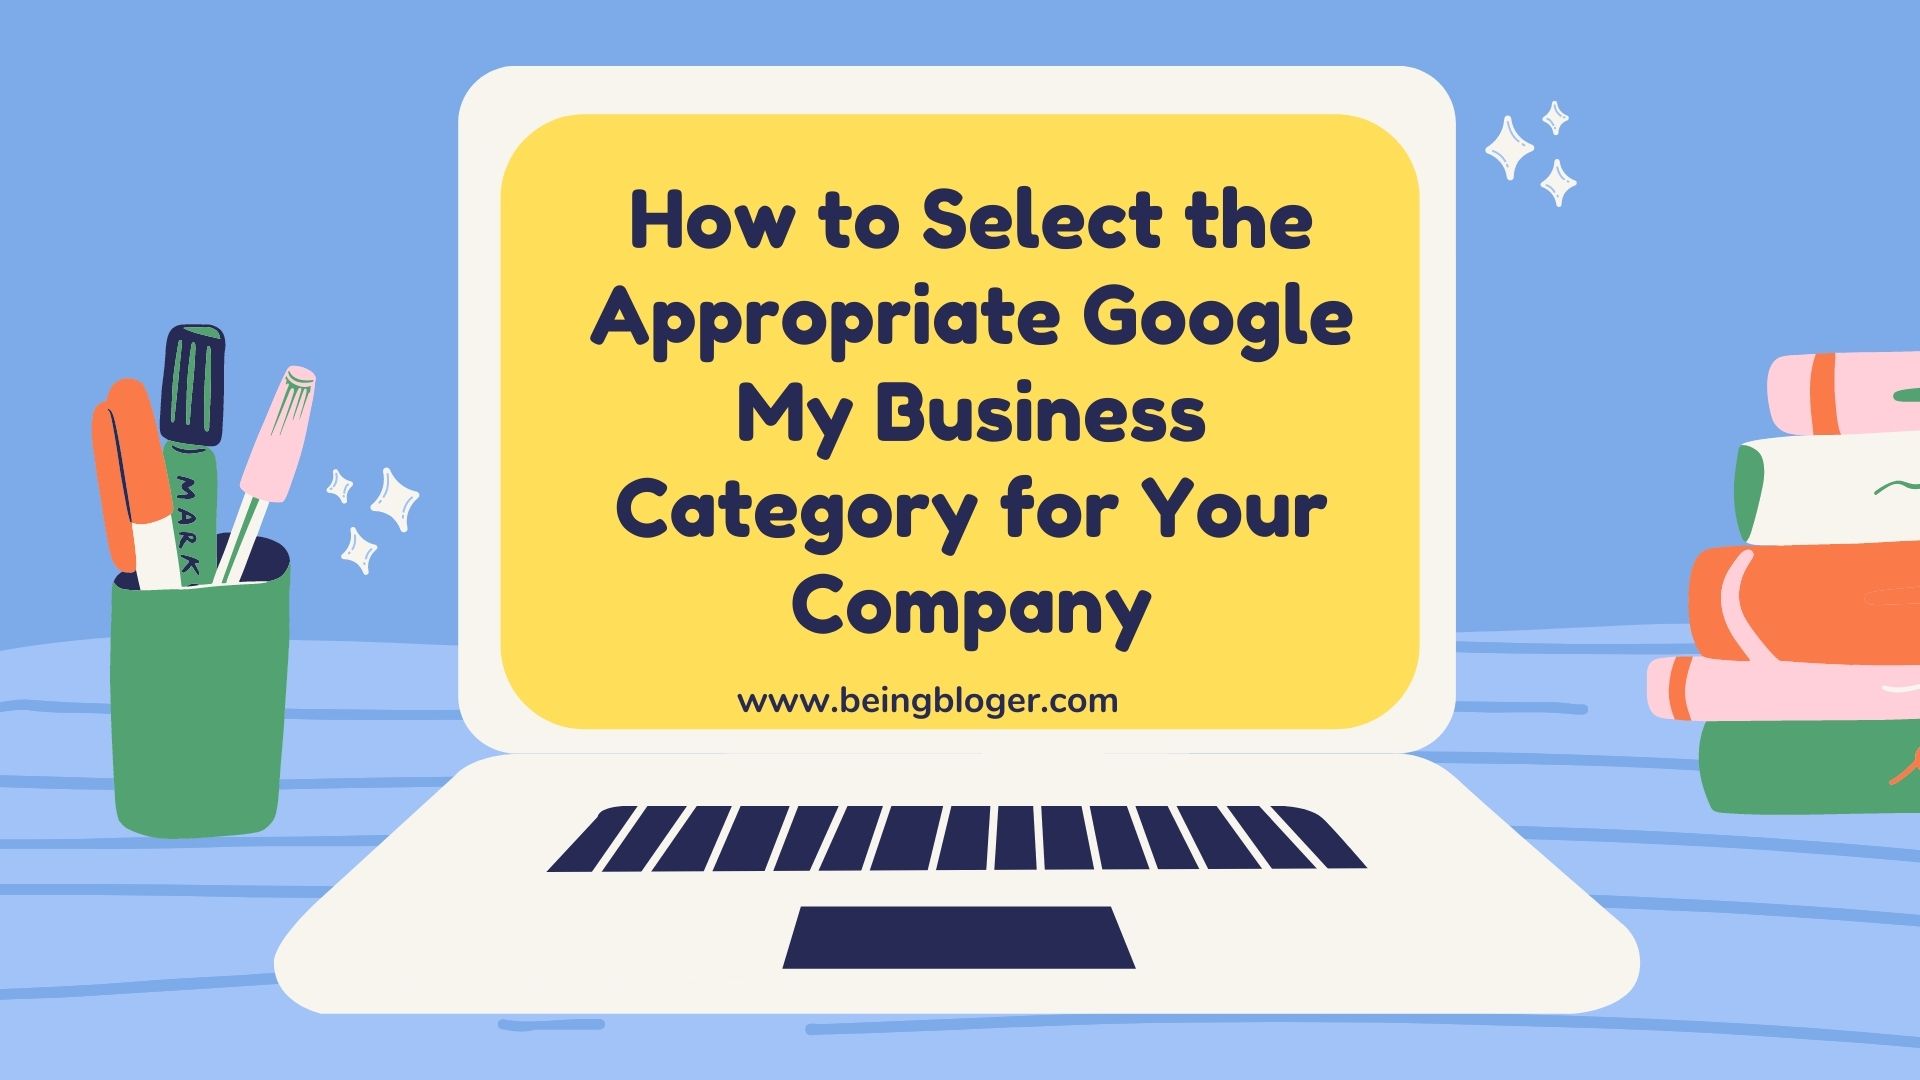 How to Select the Appropriate Google My Business Category for Your Company